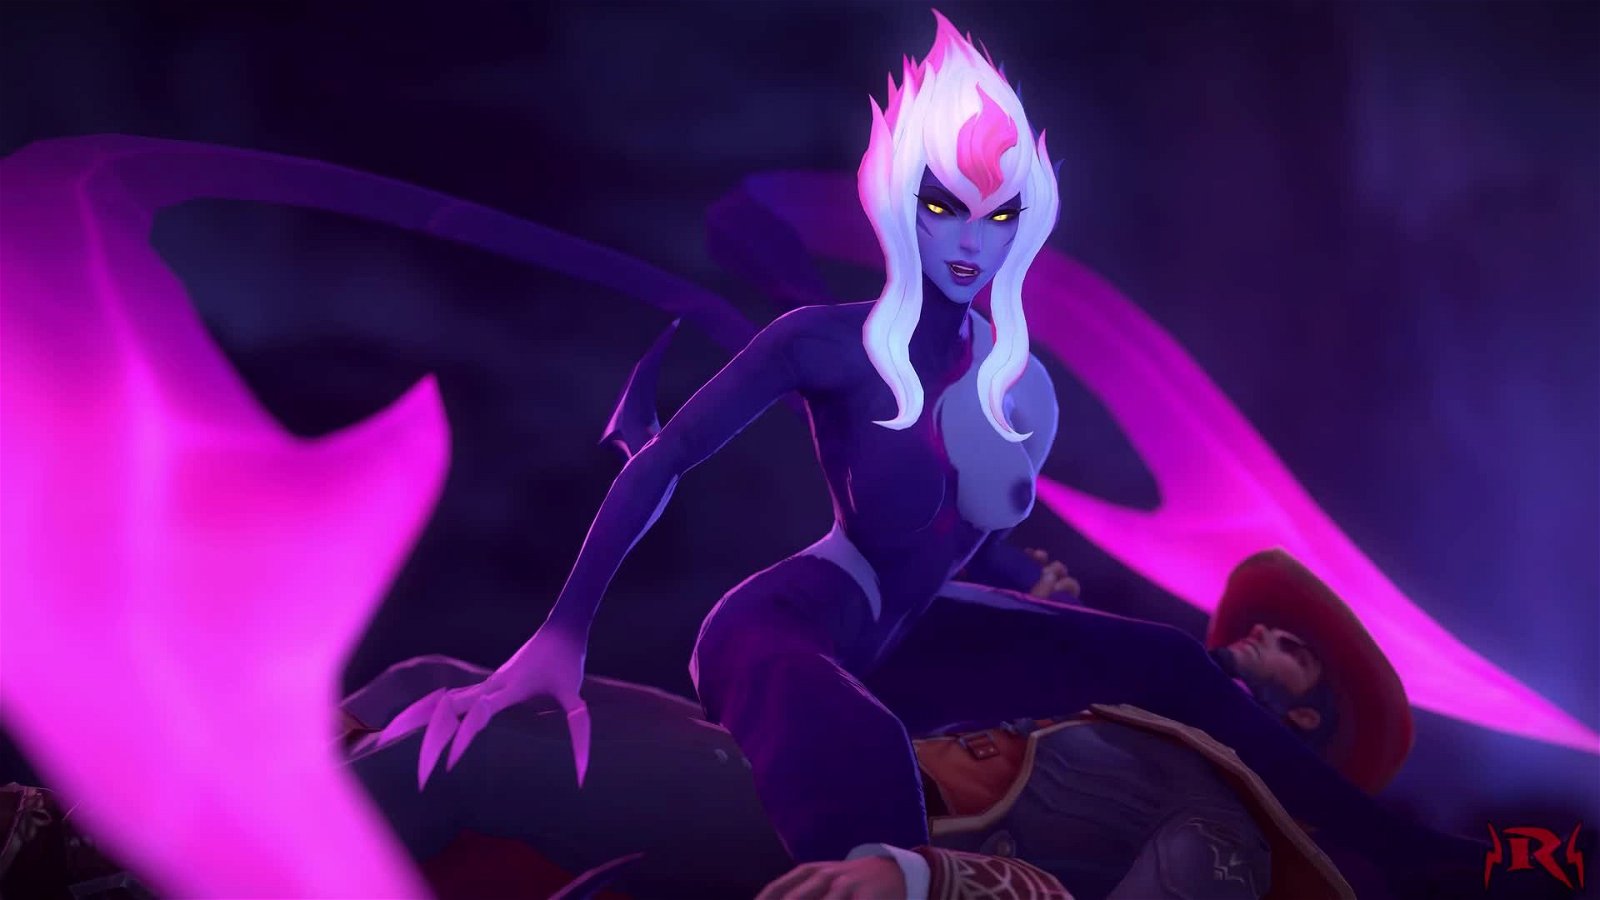 Video by Rexx with the username @rexxworld, who is a verified user,  August 1, 2021 at 1:20 AM. The post is about the topic 3D Animation Gaming and the text says '[SOUND] (League of Legends) The Ambush
#3D #LeagueOfLegends #Evelynn #Cowgirl
Like what I do? Funding links in my profile, or just send some Flame'